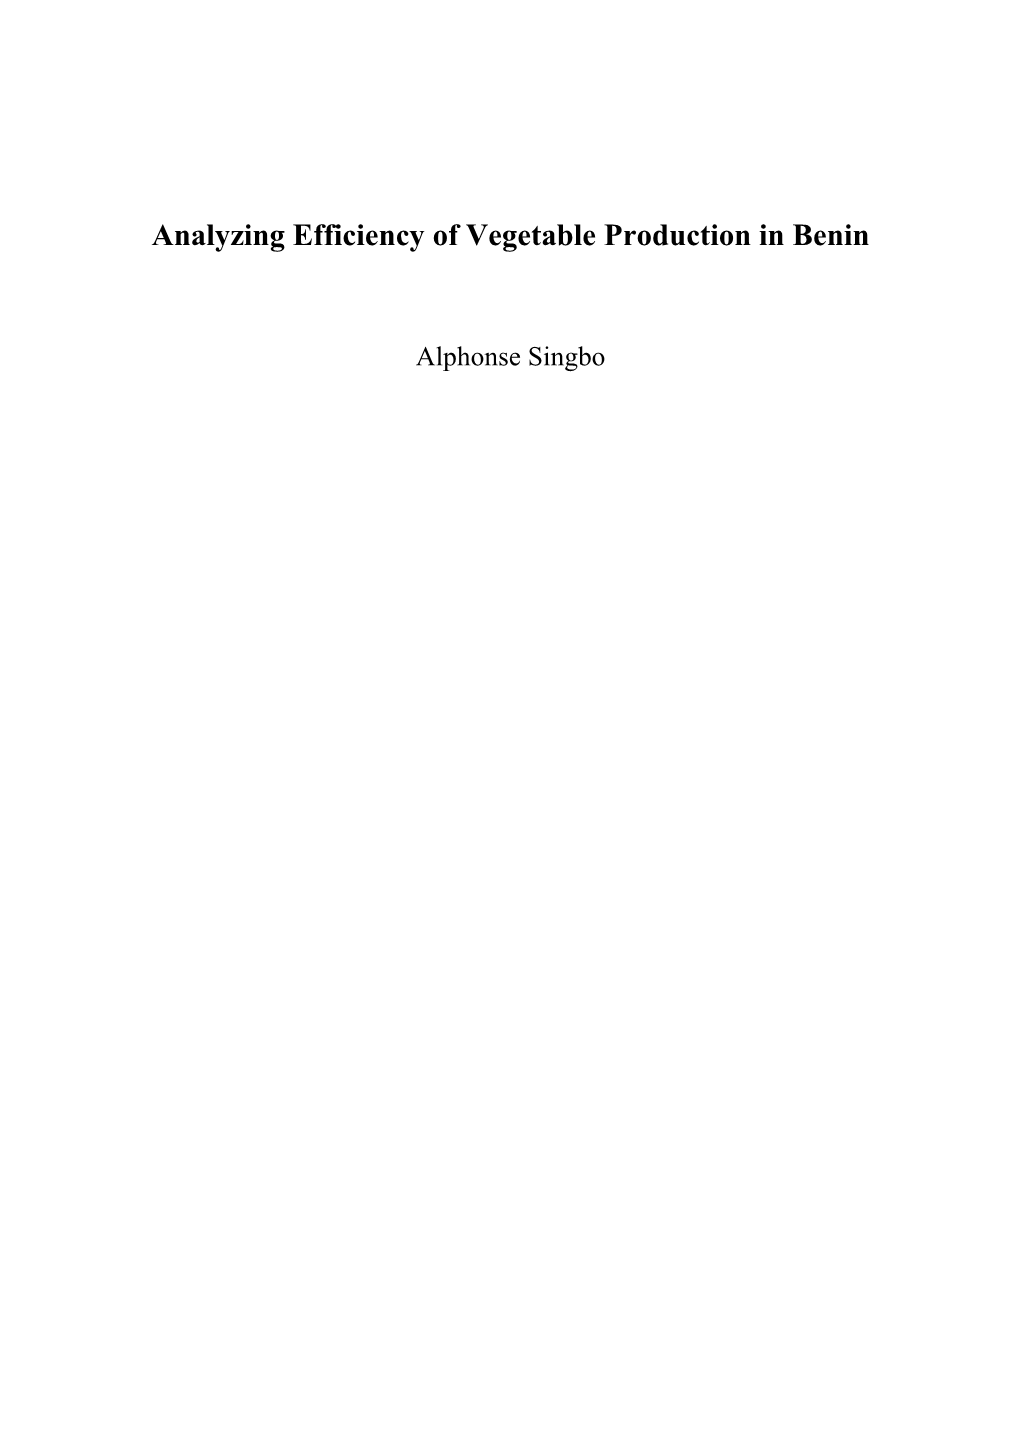 Analyzing Efficiency of Vegetable Production in Benin